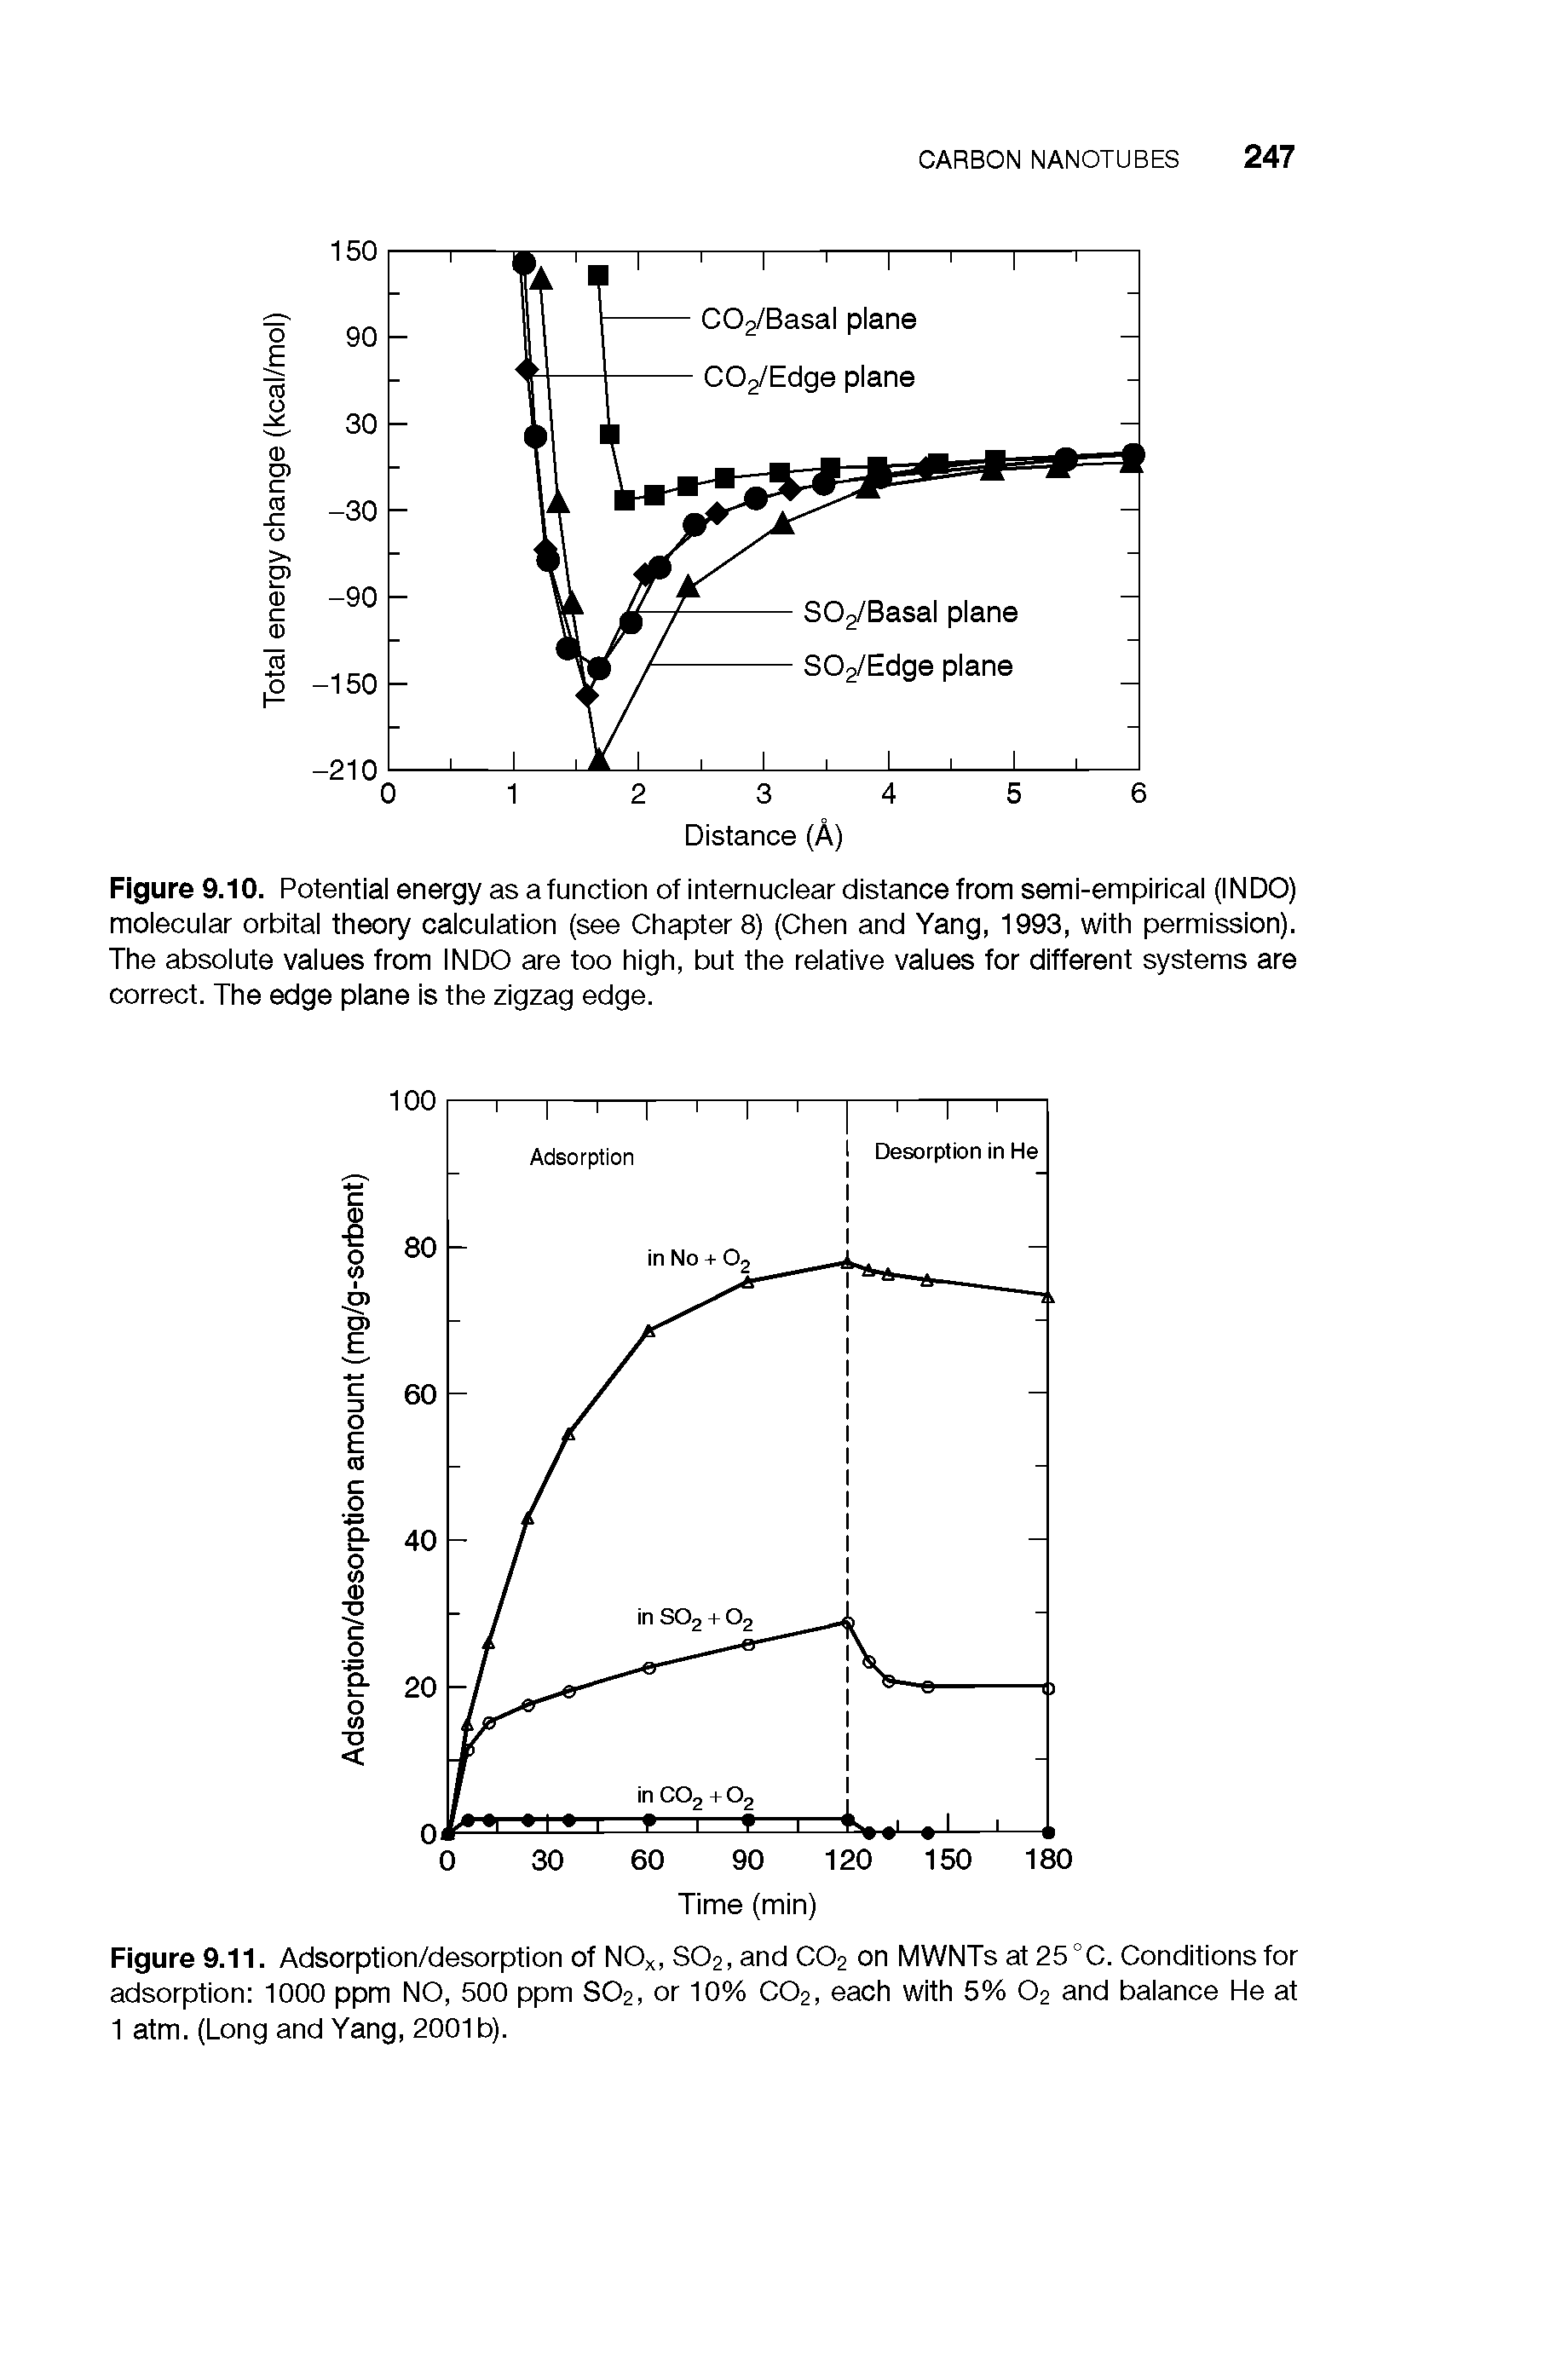 Figure 9.10. Potential energy as a function of internuclear distance from semi-empirical (INDO) molecular orbital theory calculation (see Chapter 8) (Chen and Yang, 1993, with permission). The absolute values from INDO are too high, but the relative values for different systems are correct. The edge plane is the zigzag edge.